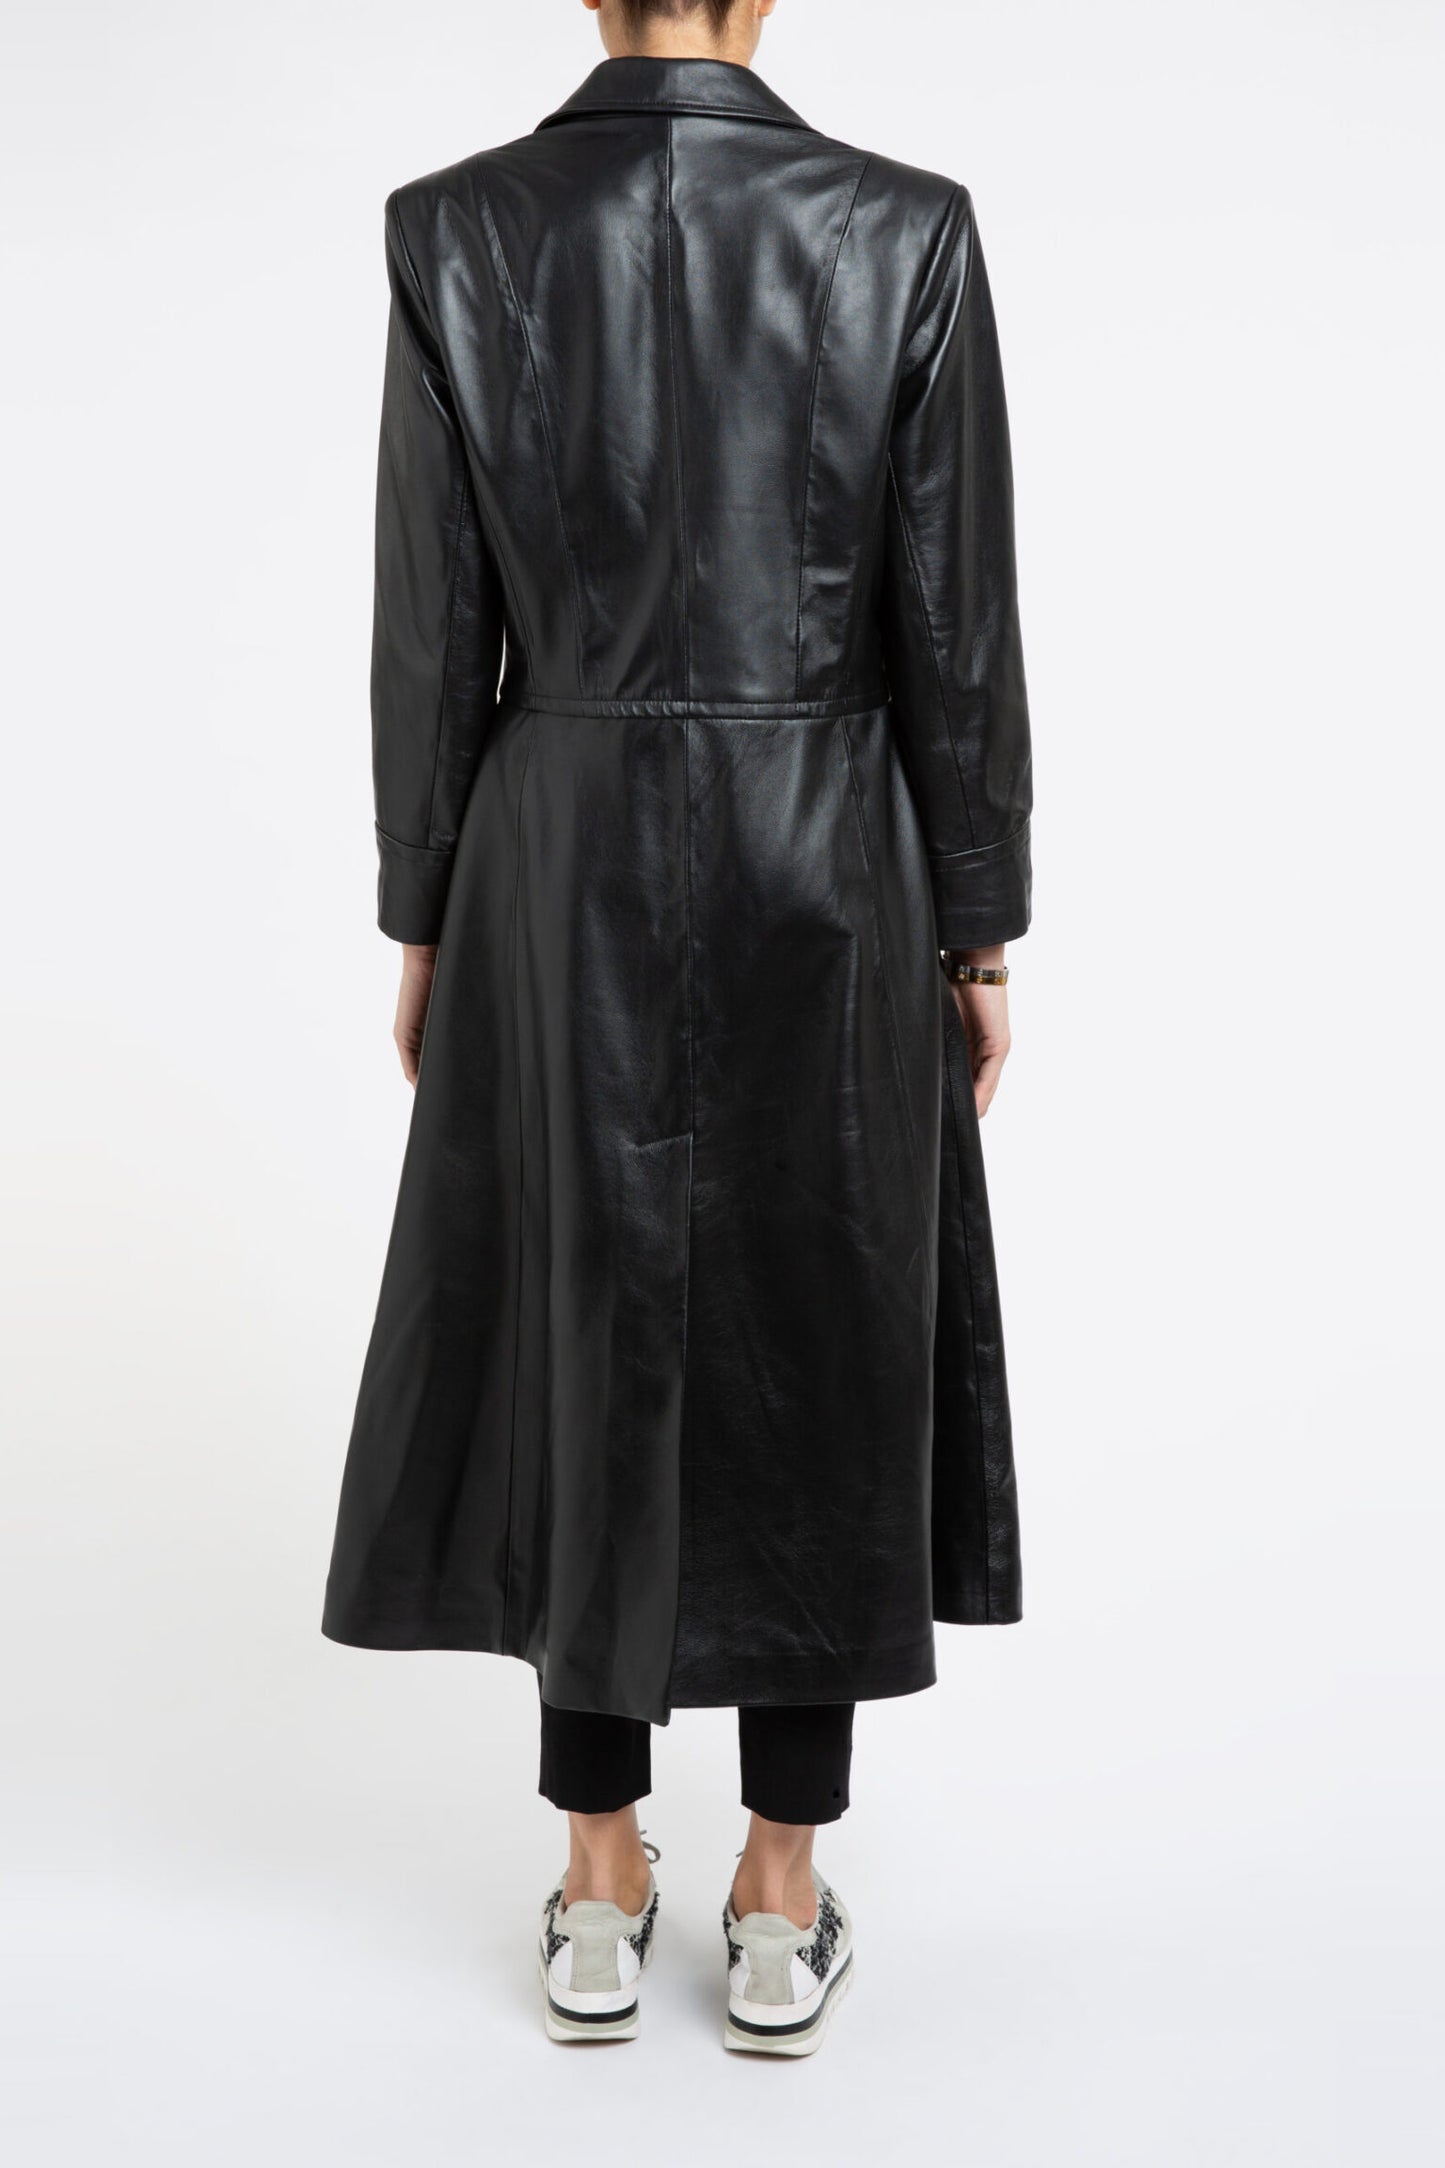 Oversize 70s Leather Trench Coat